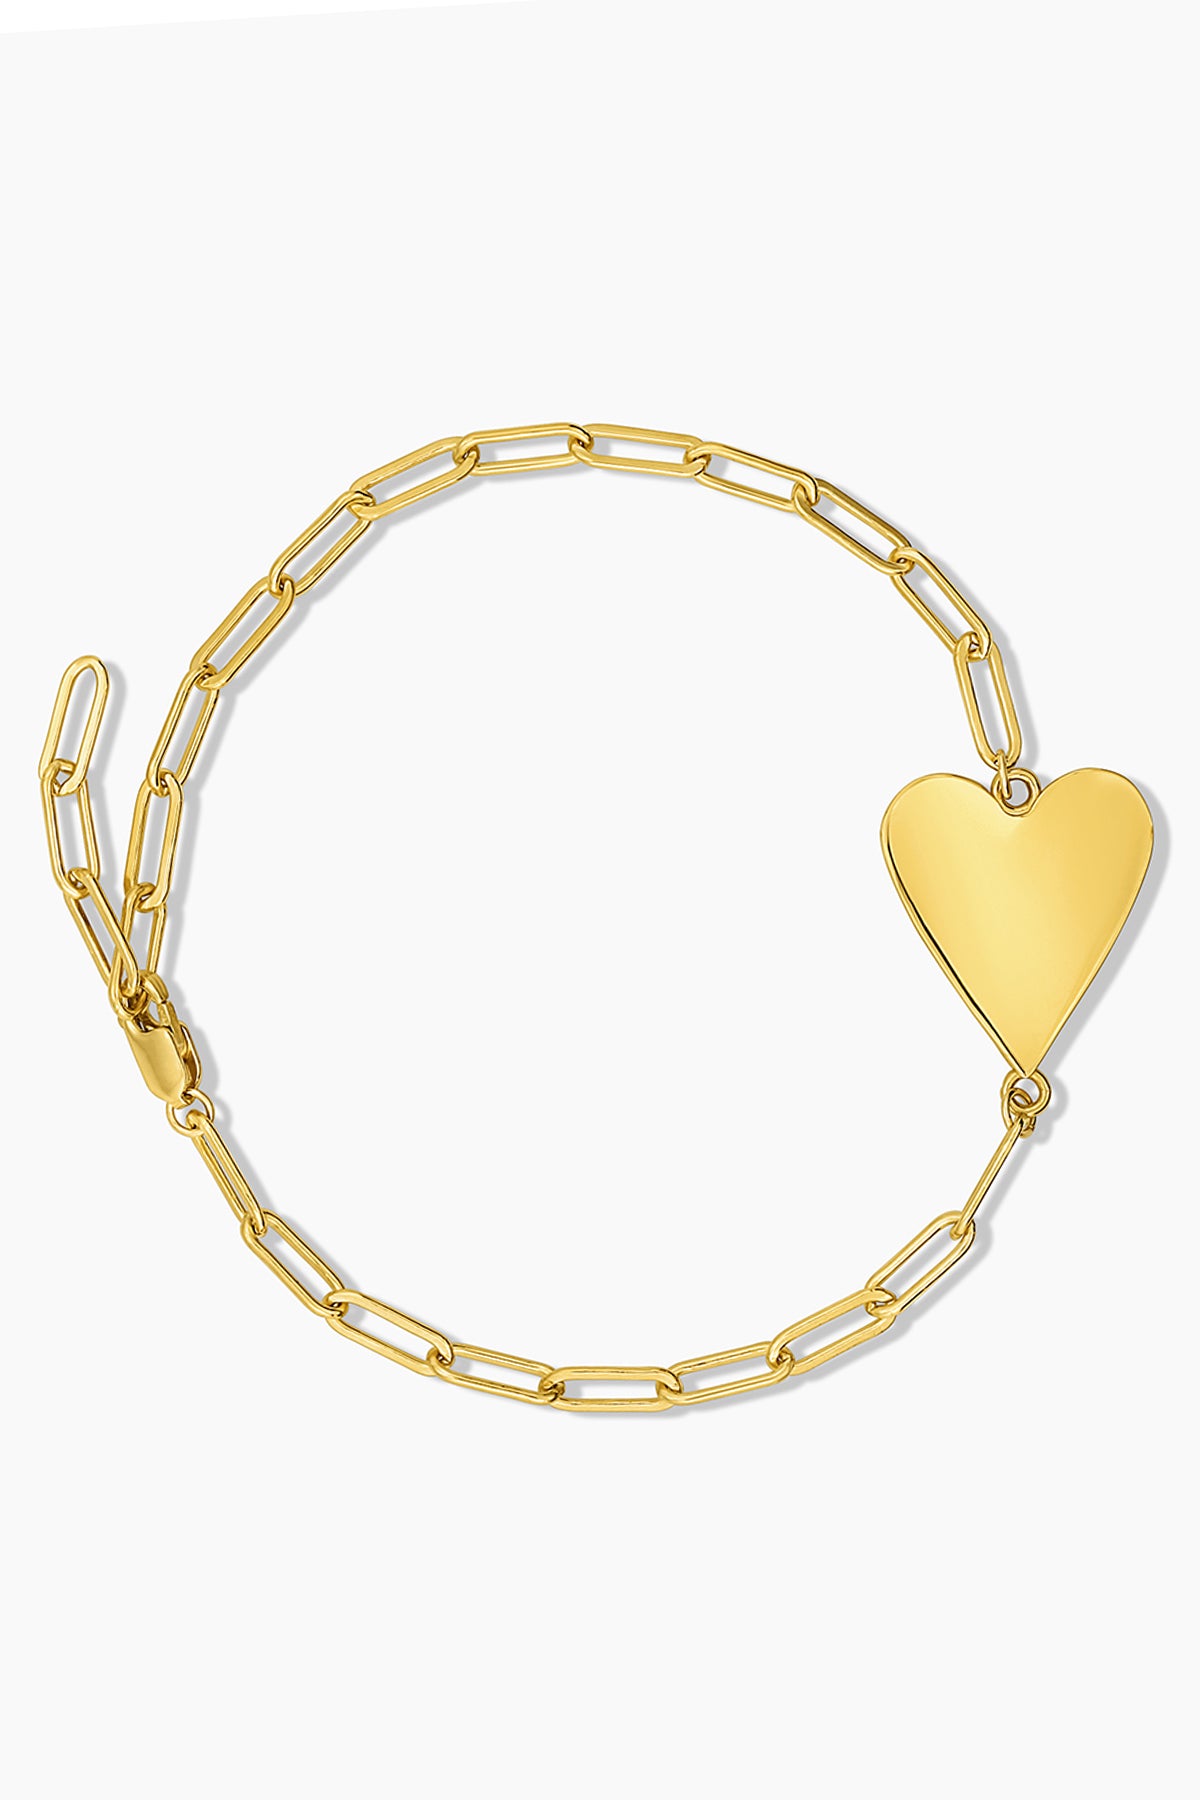 A AMAYA HEART BRACELET BY THATCH with a heart shaped charm.-35526304137409